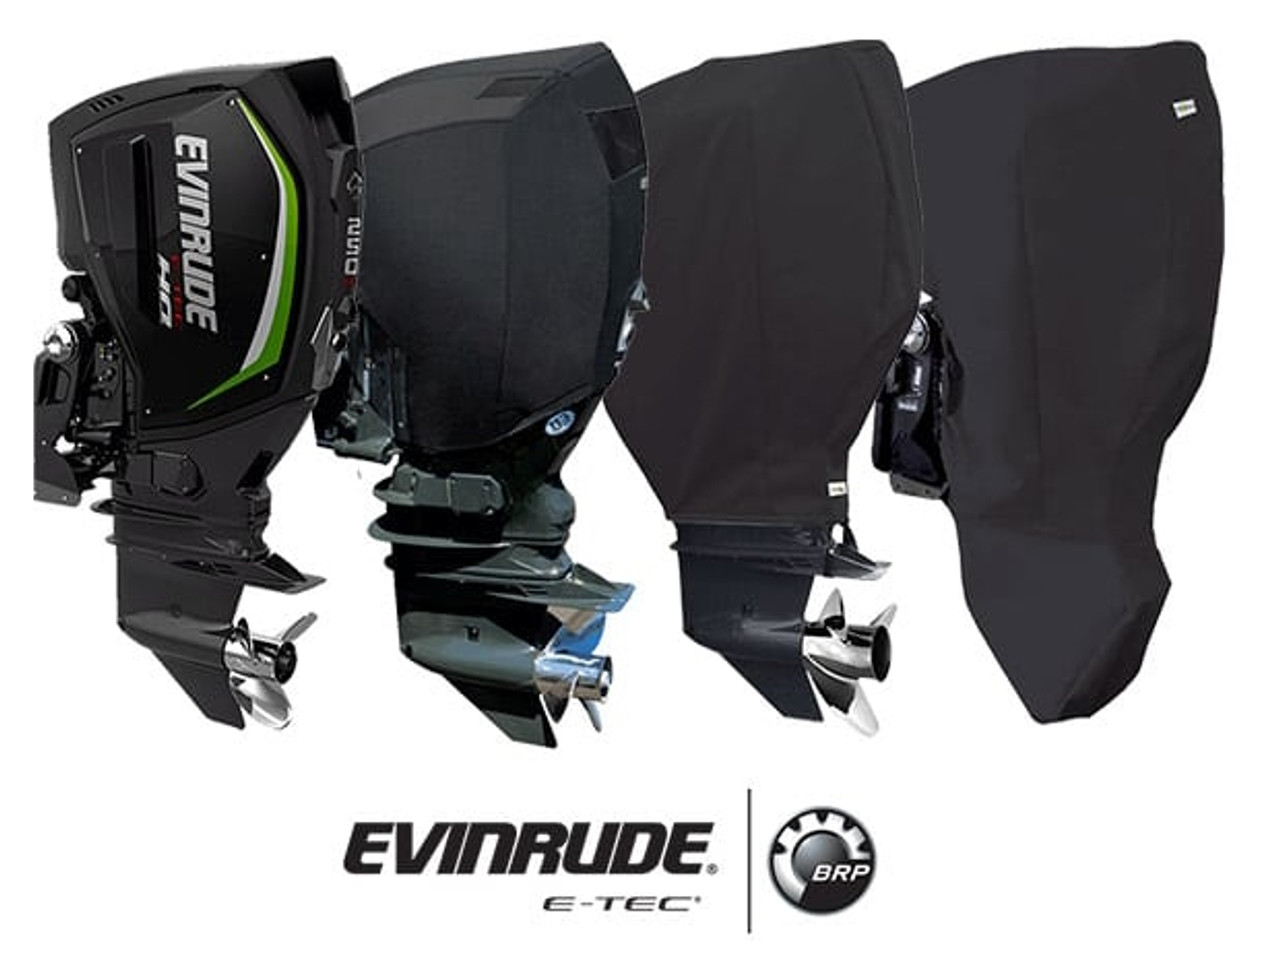 Evinrude Outboard Covers